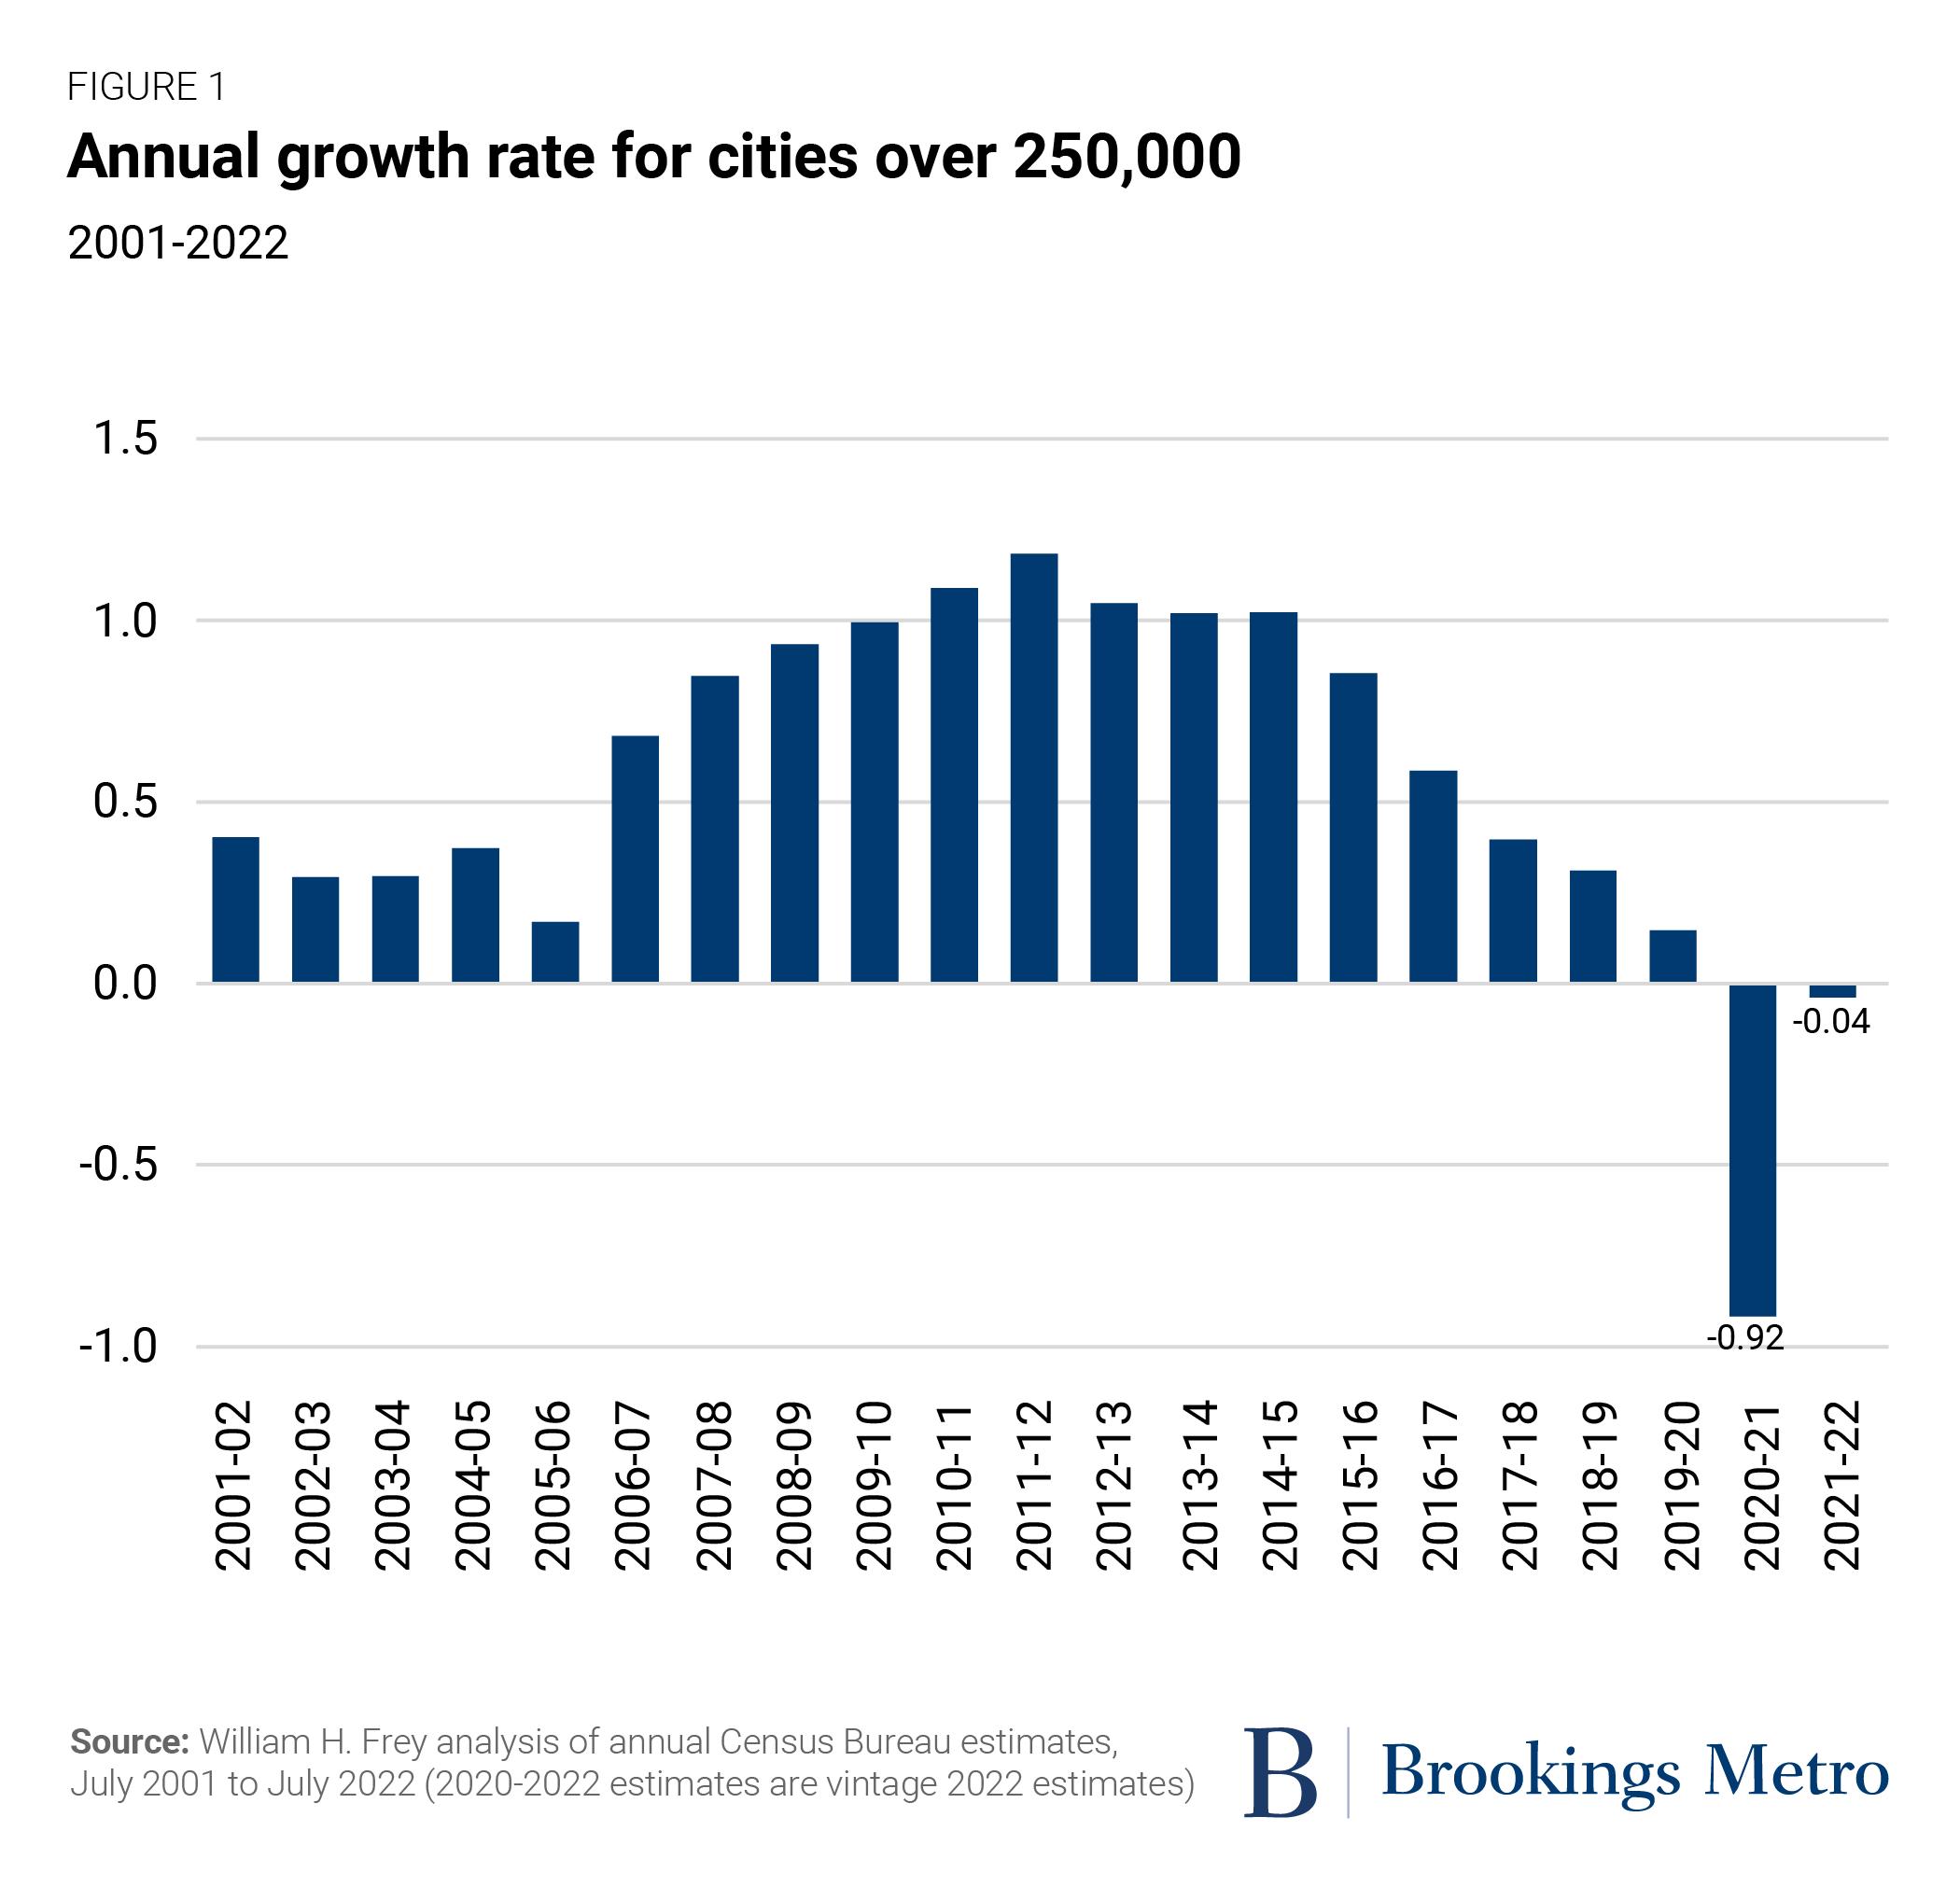 Figure 1: Annual growth rate for cities over 250,000